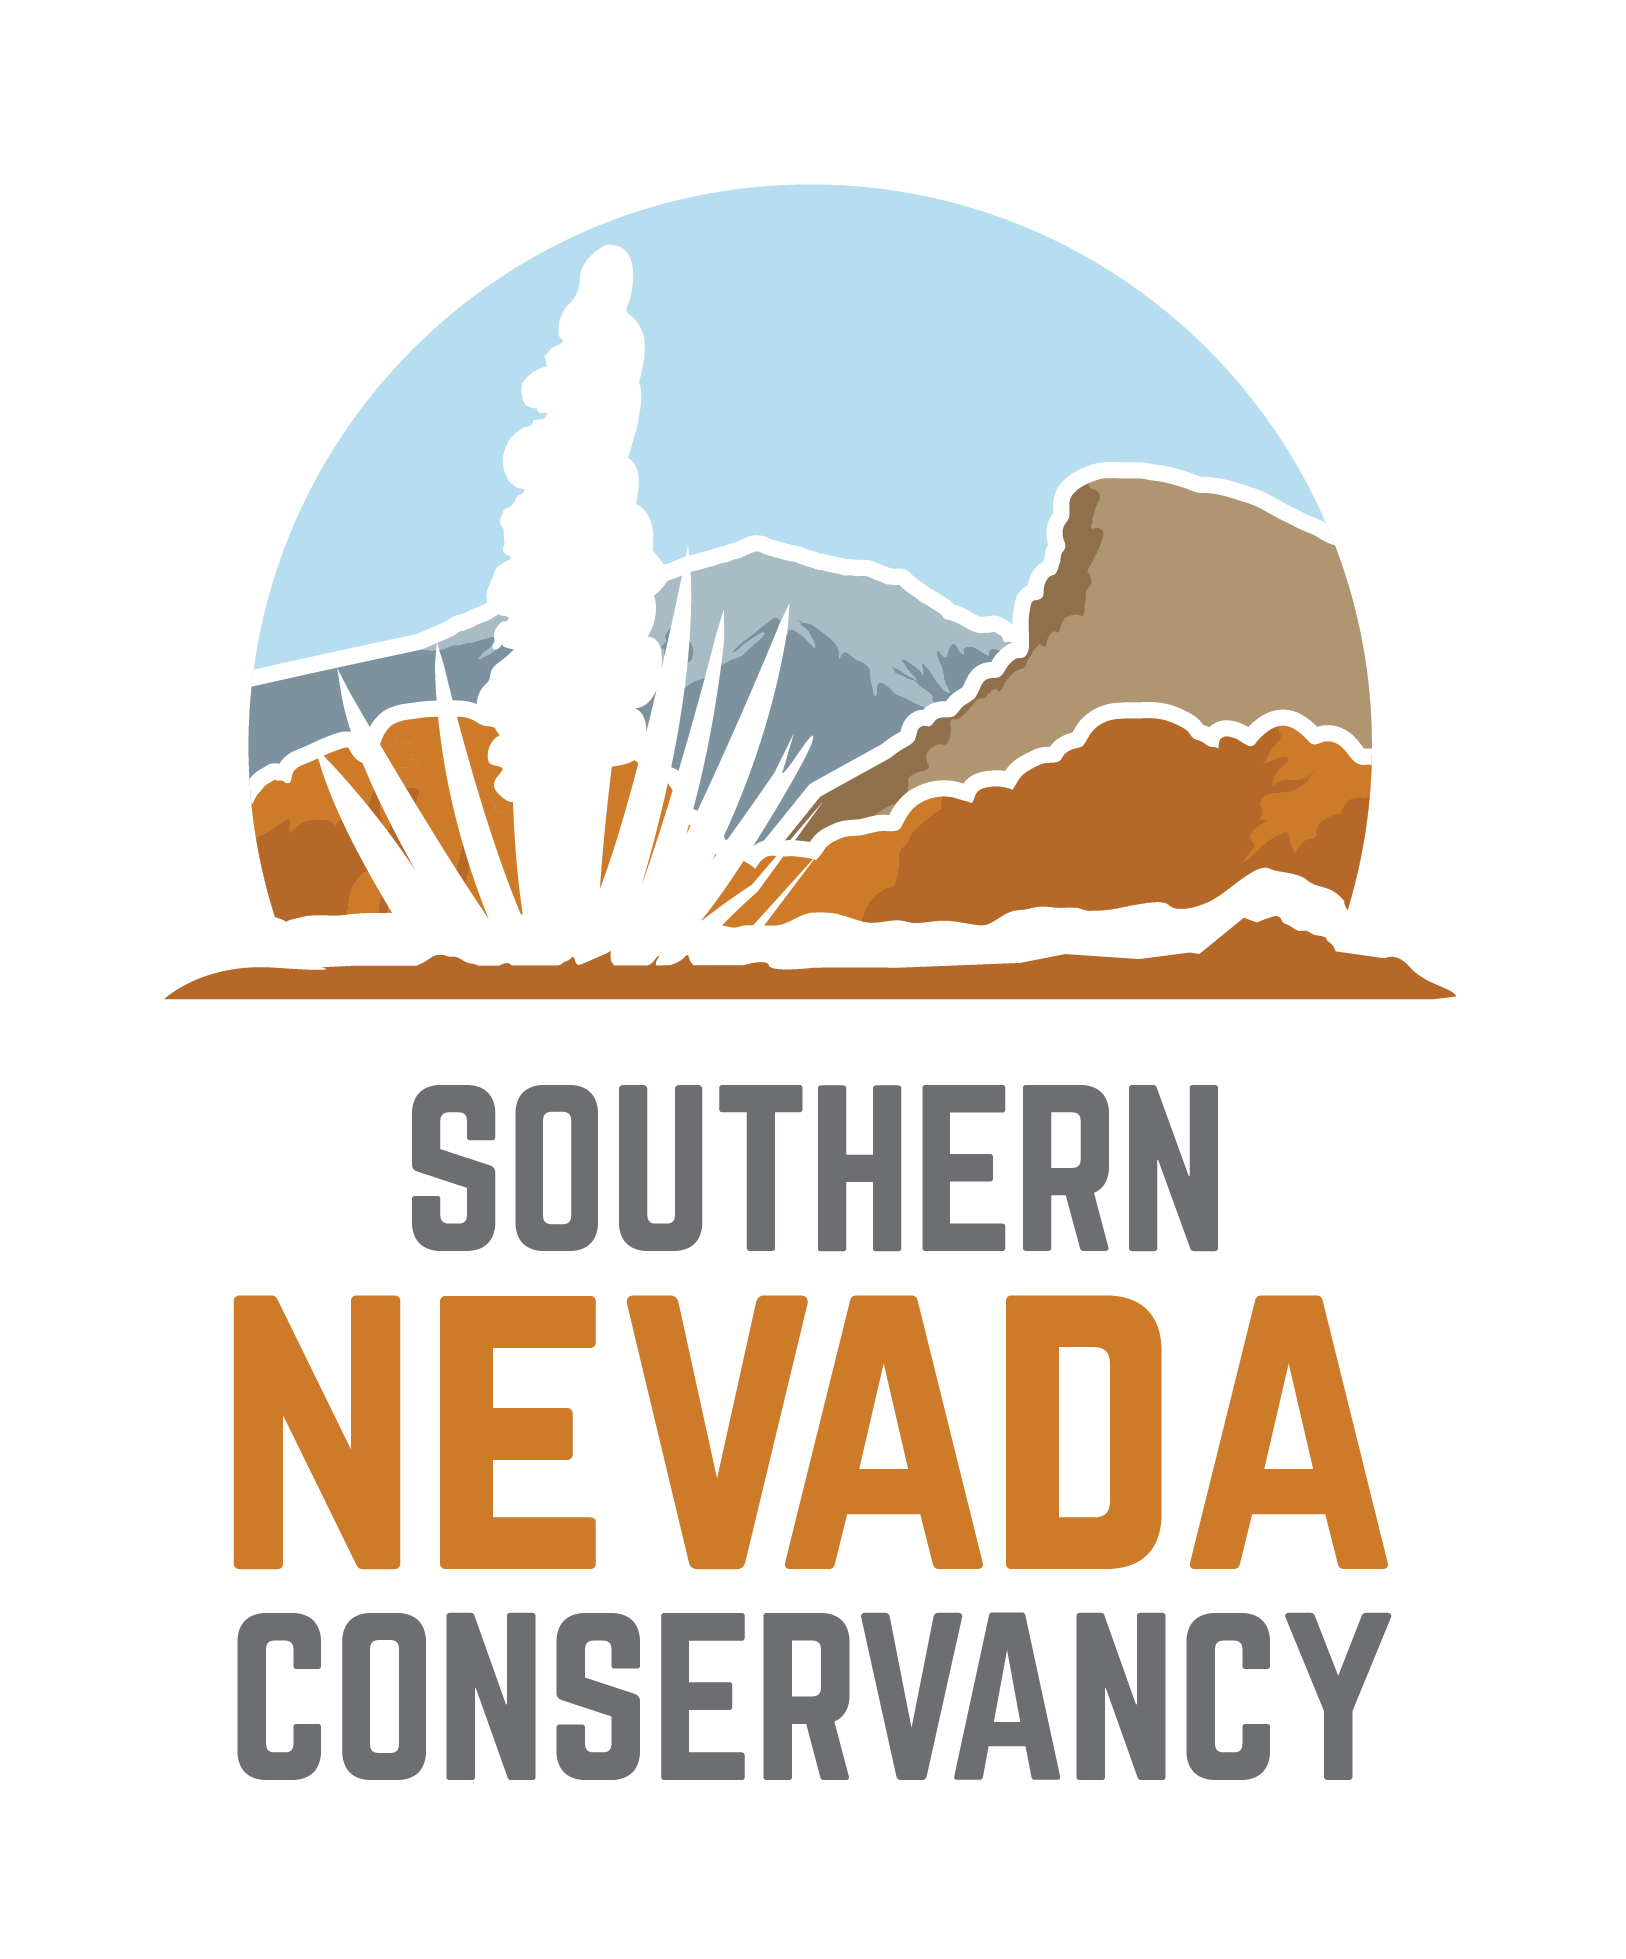 Southern Nevada Conservancy